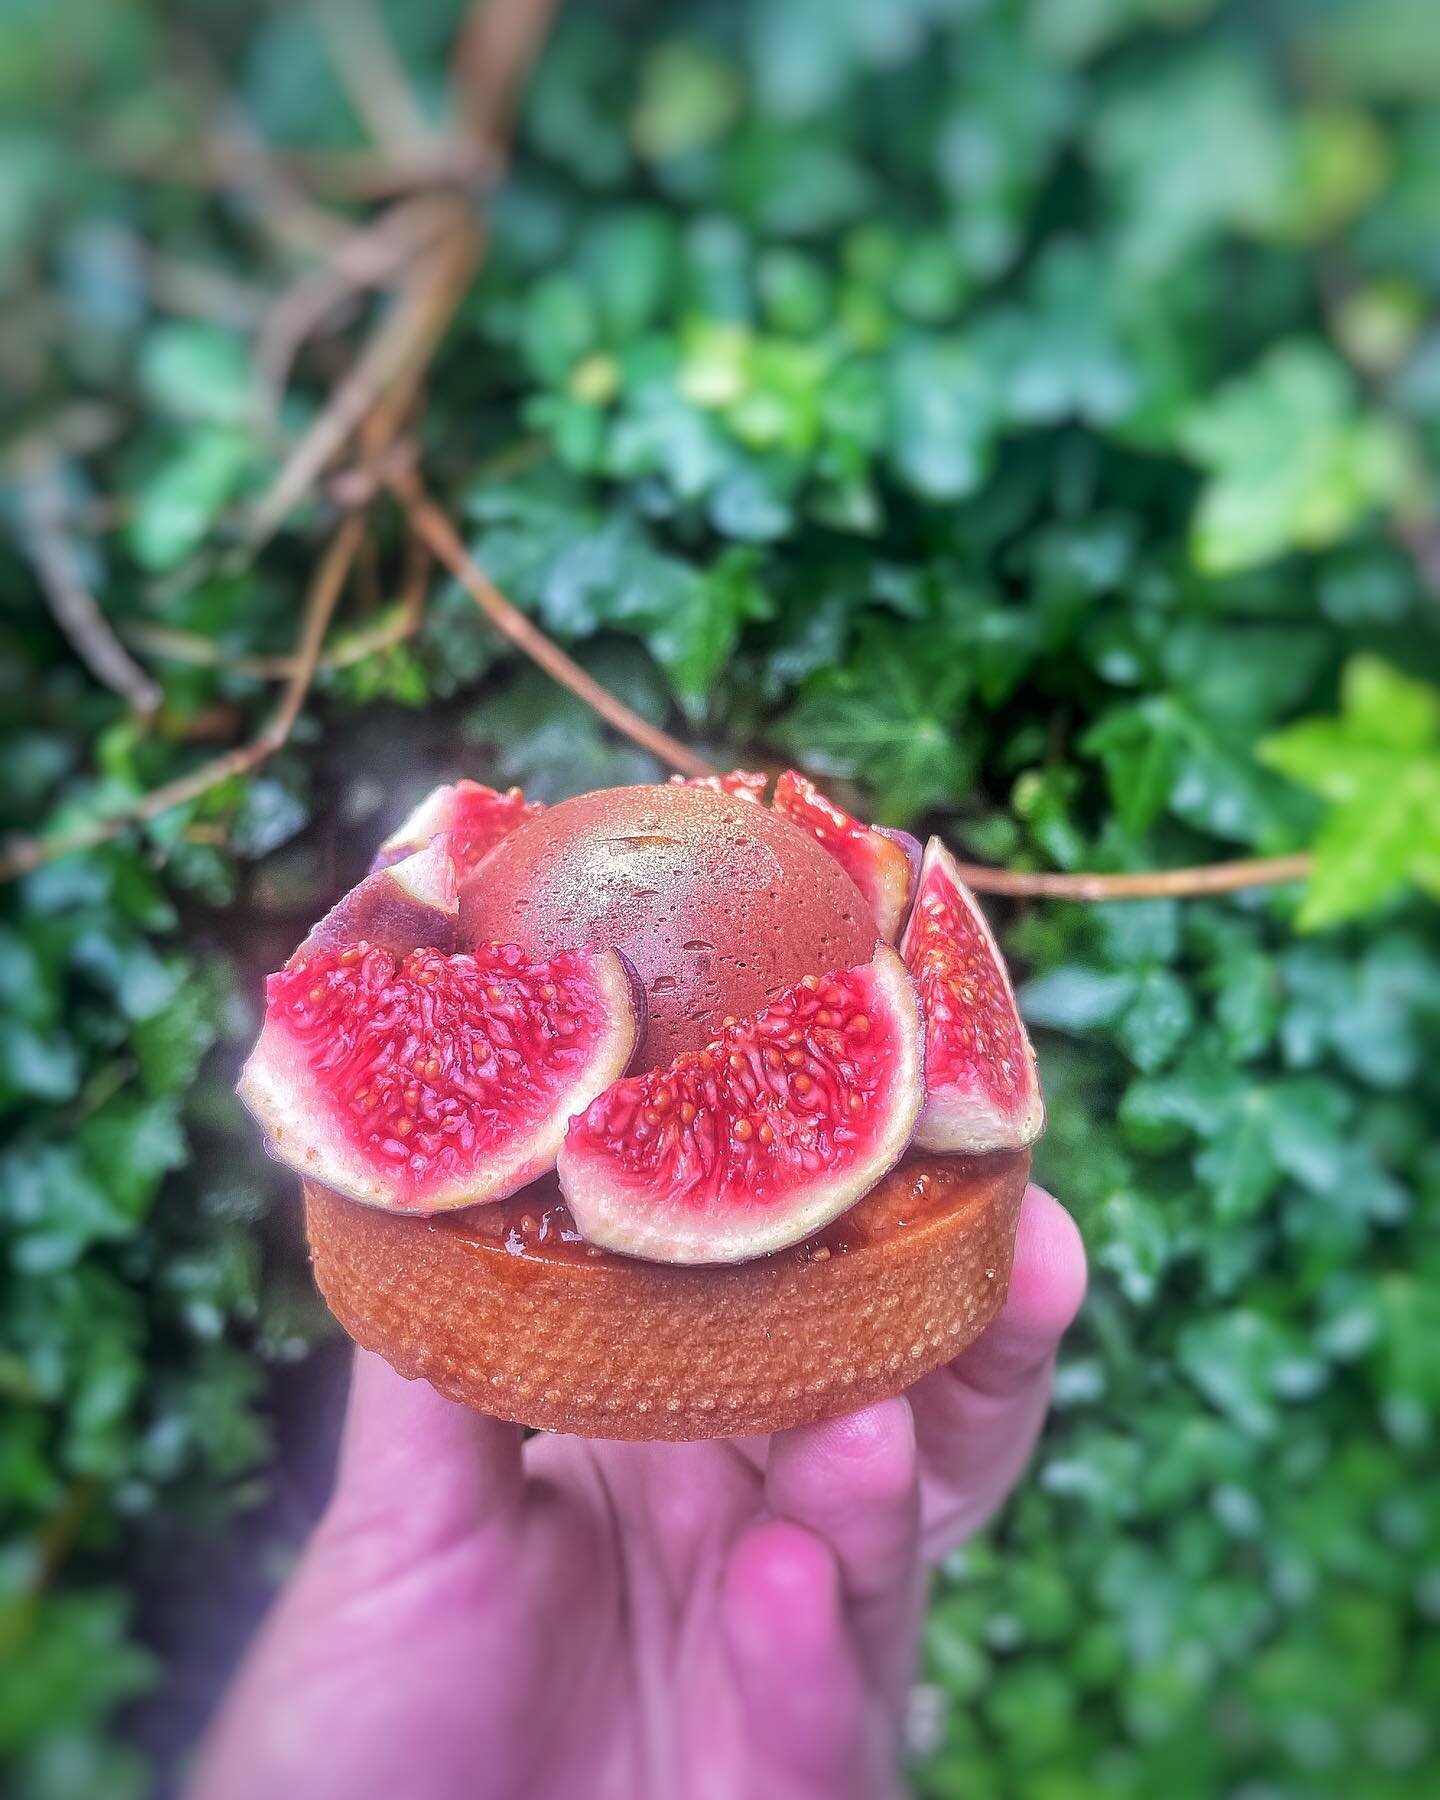 Specials are available in both shops!
Only this weekend you can have:
1. Fig tart with frangipane, fig jam, chocolate dome and fresh figs
2. Pecan Emmanuel sponge with chocolate mousse, crispy raspberry and caramel stones
Here till 6 in Glasgow and 5